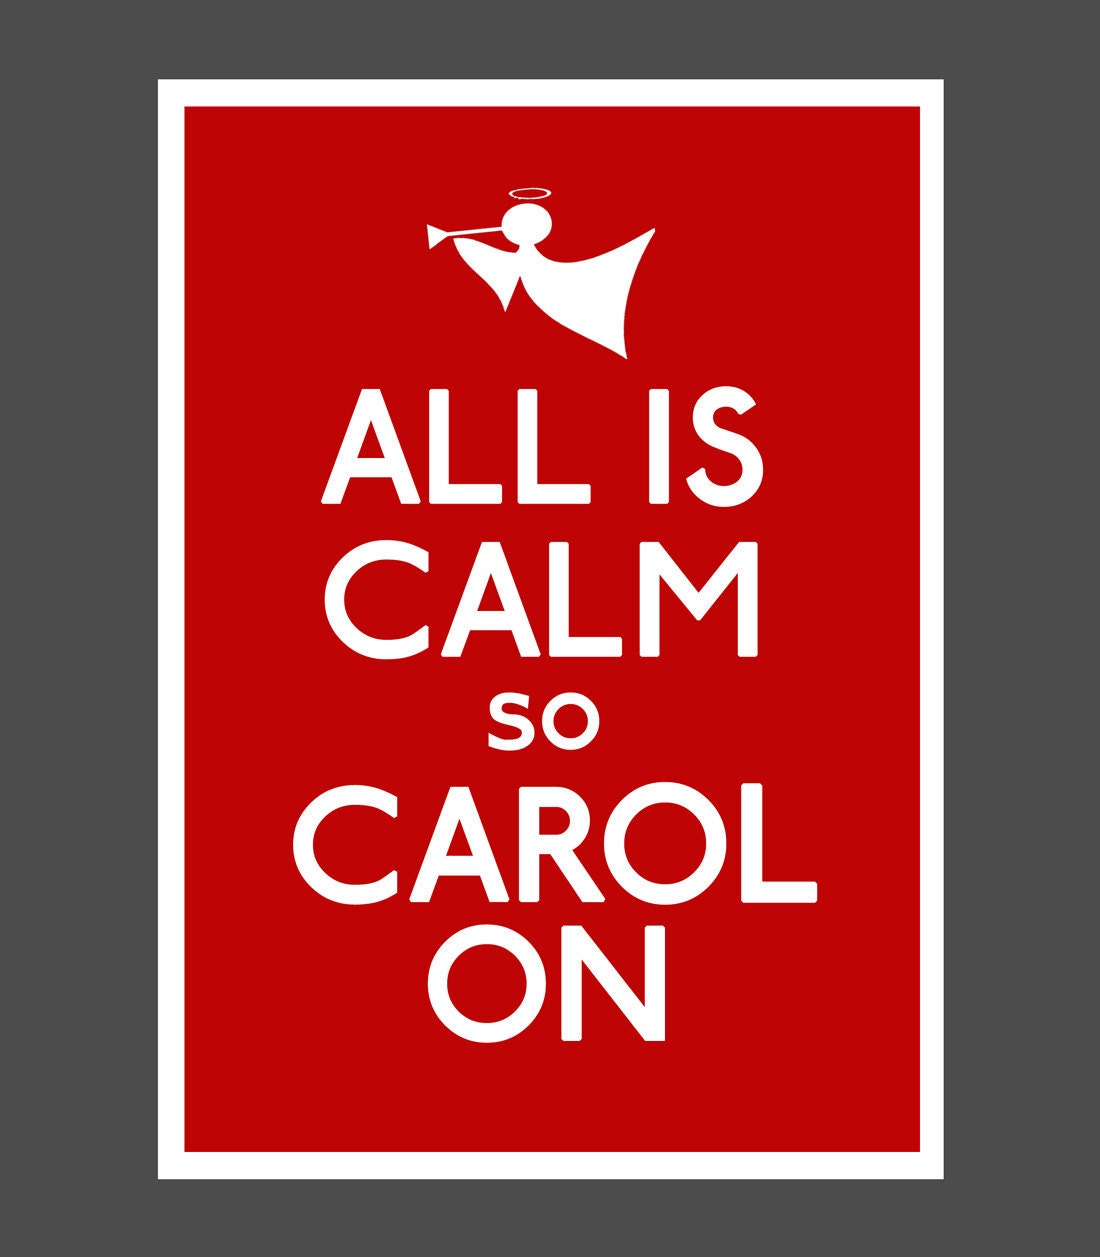 Christmas Poster version of Keep Calm and Carry On, ALL IS CALM so Carol On, Holiday wall decor, Printable 5x7, 8x10, or 11x14